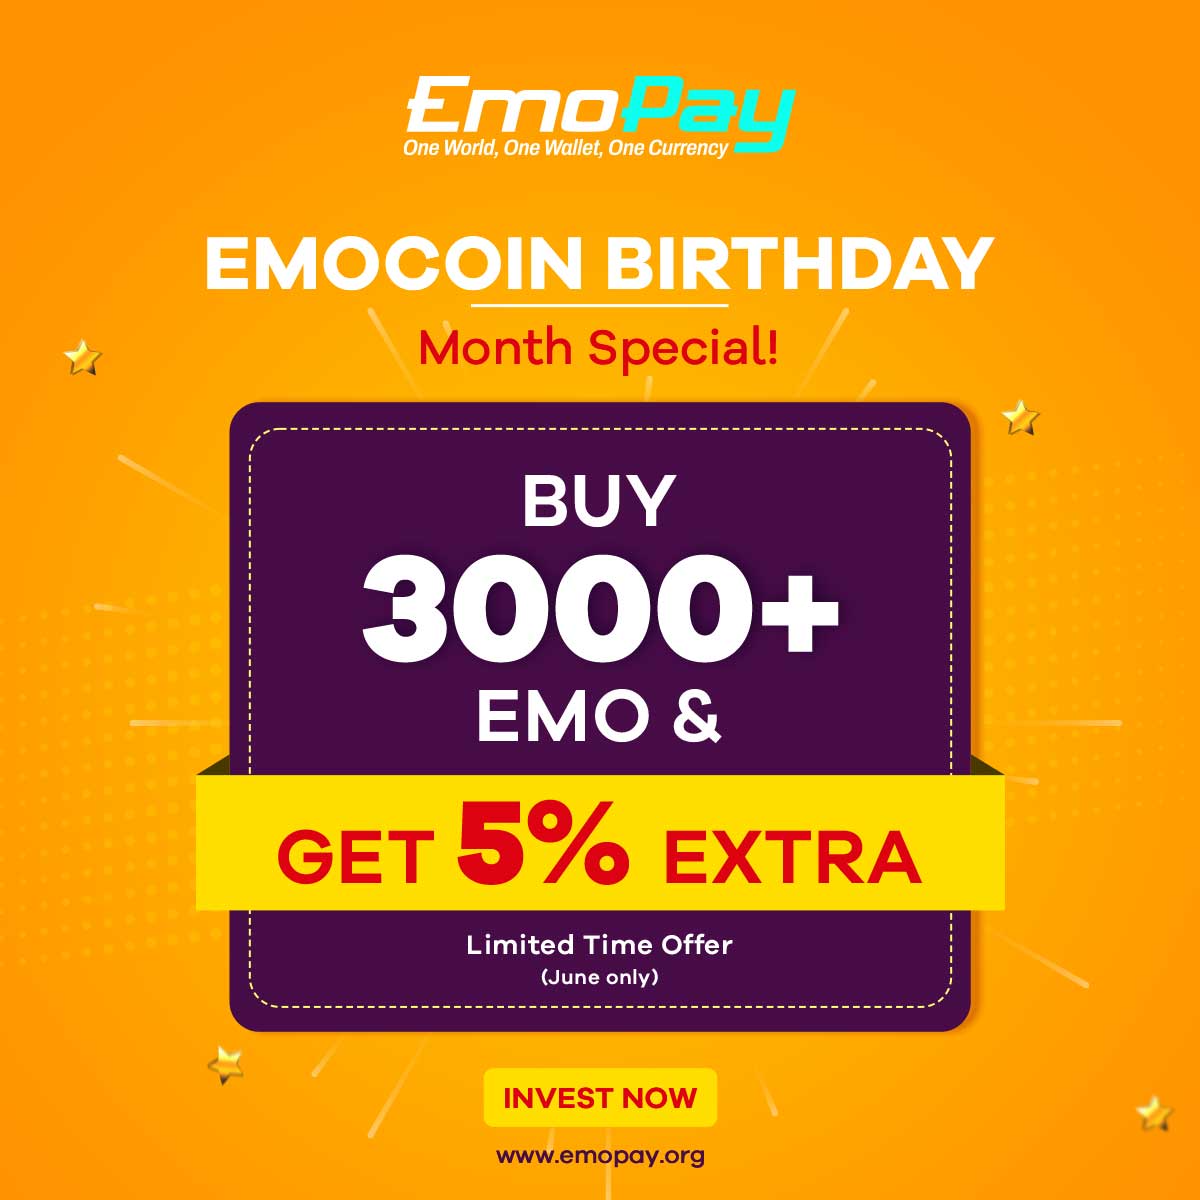 ⏰ Act fast, this special offer is only available for the month of June!
Don't miss out! ⌛️

Buy now at emopay.org

#EmoCoinBirthdayMonth #SpecialOffer #invest #InvestNow #Emocoin #JuneOnly #cryptocurrency #Growth #trading #Crypto #ExtraBonus #Emopay #Wednesdayvibe